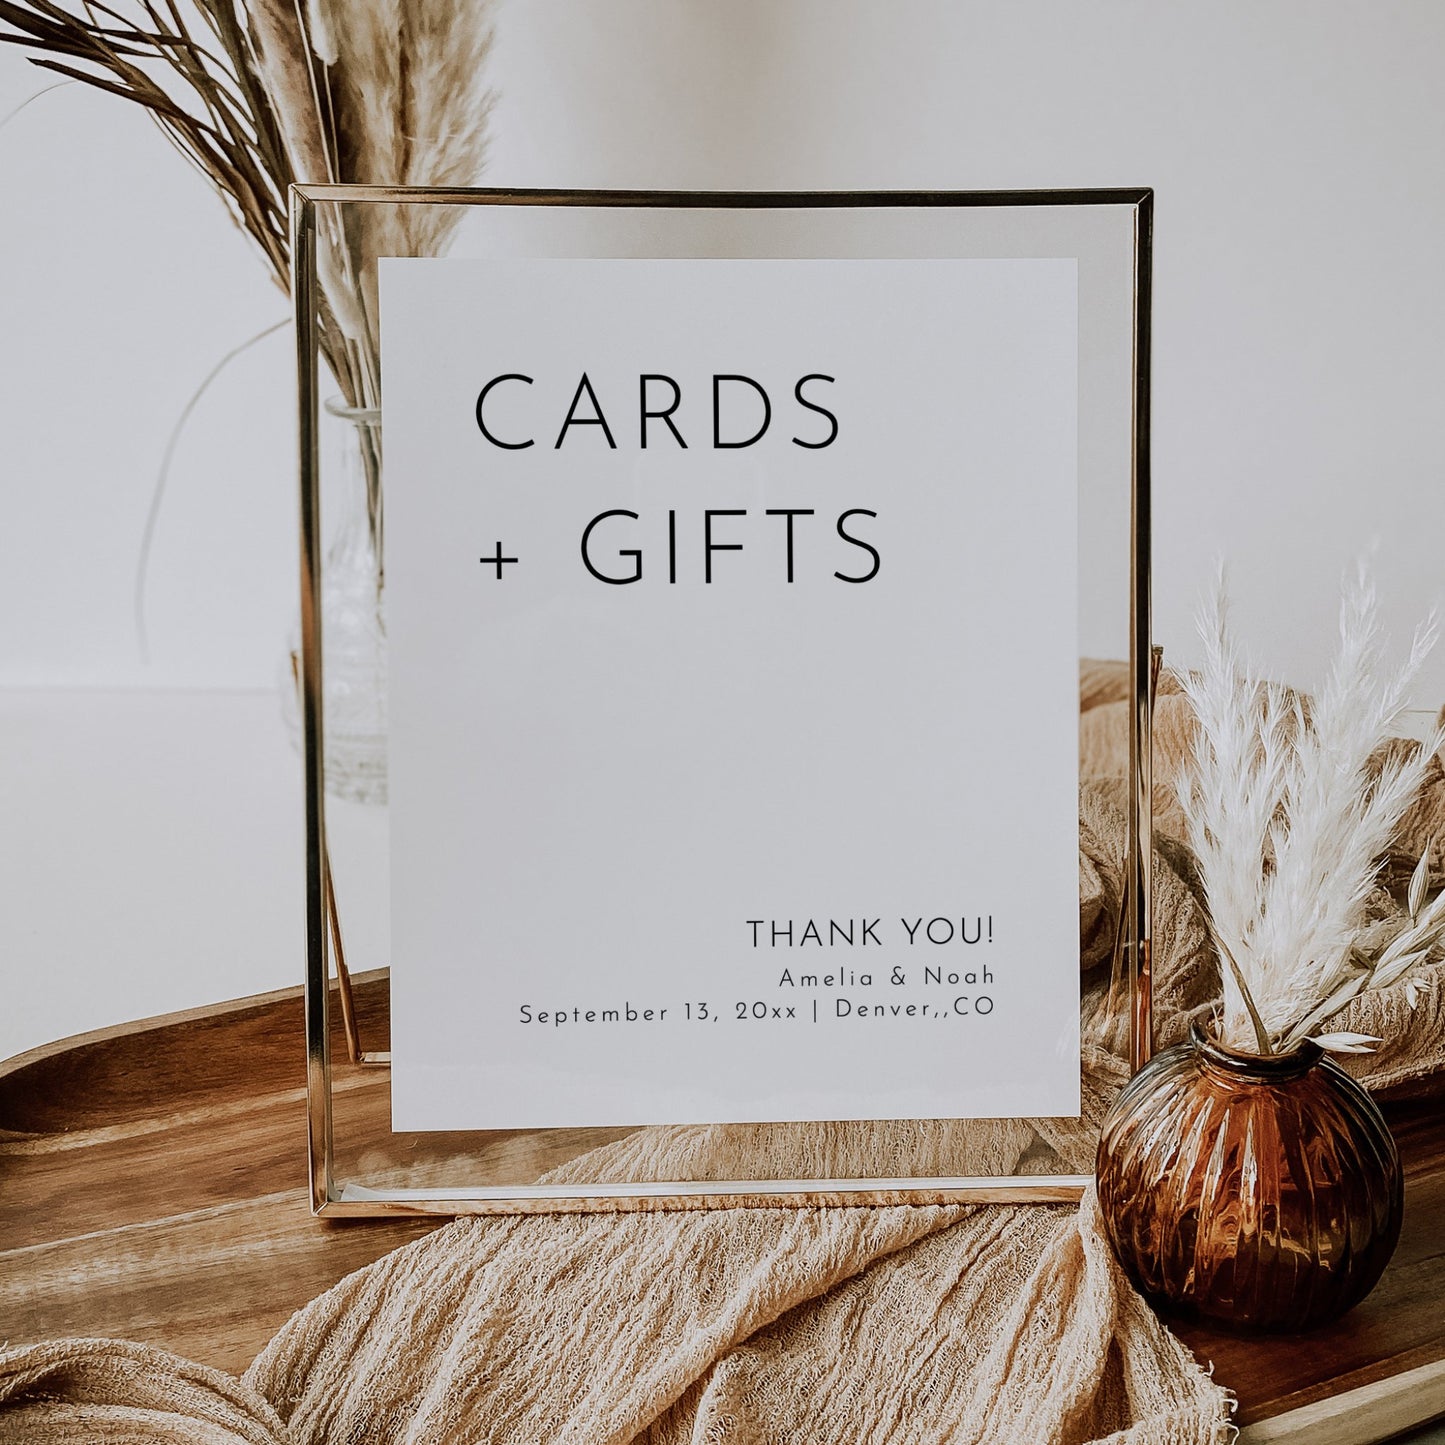 Simple Wedding Reception Cards & Gifts Sign - Elegant Thank You Table Decoration - SincerelyByNicole